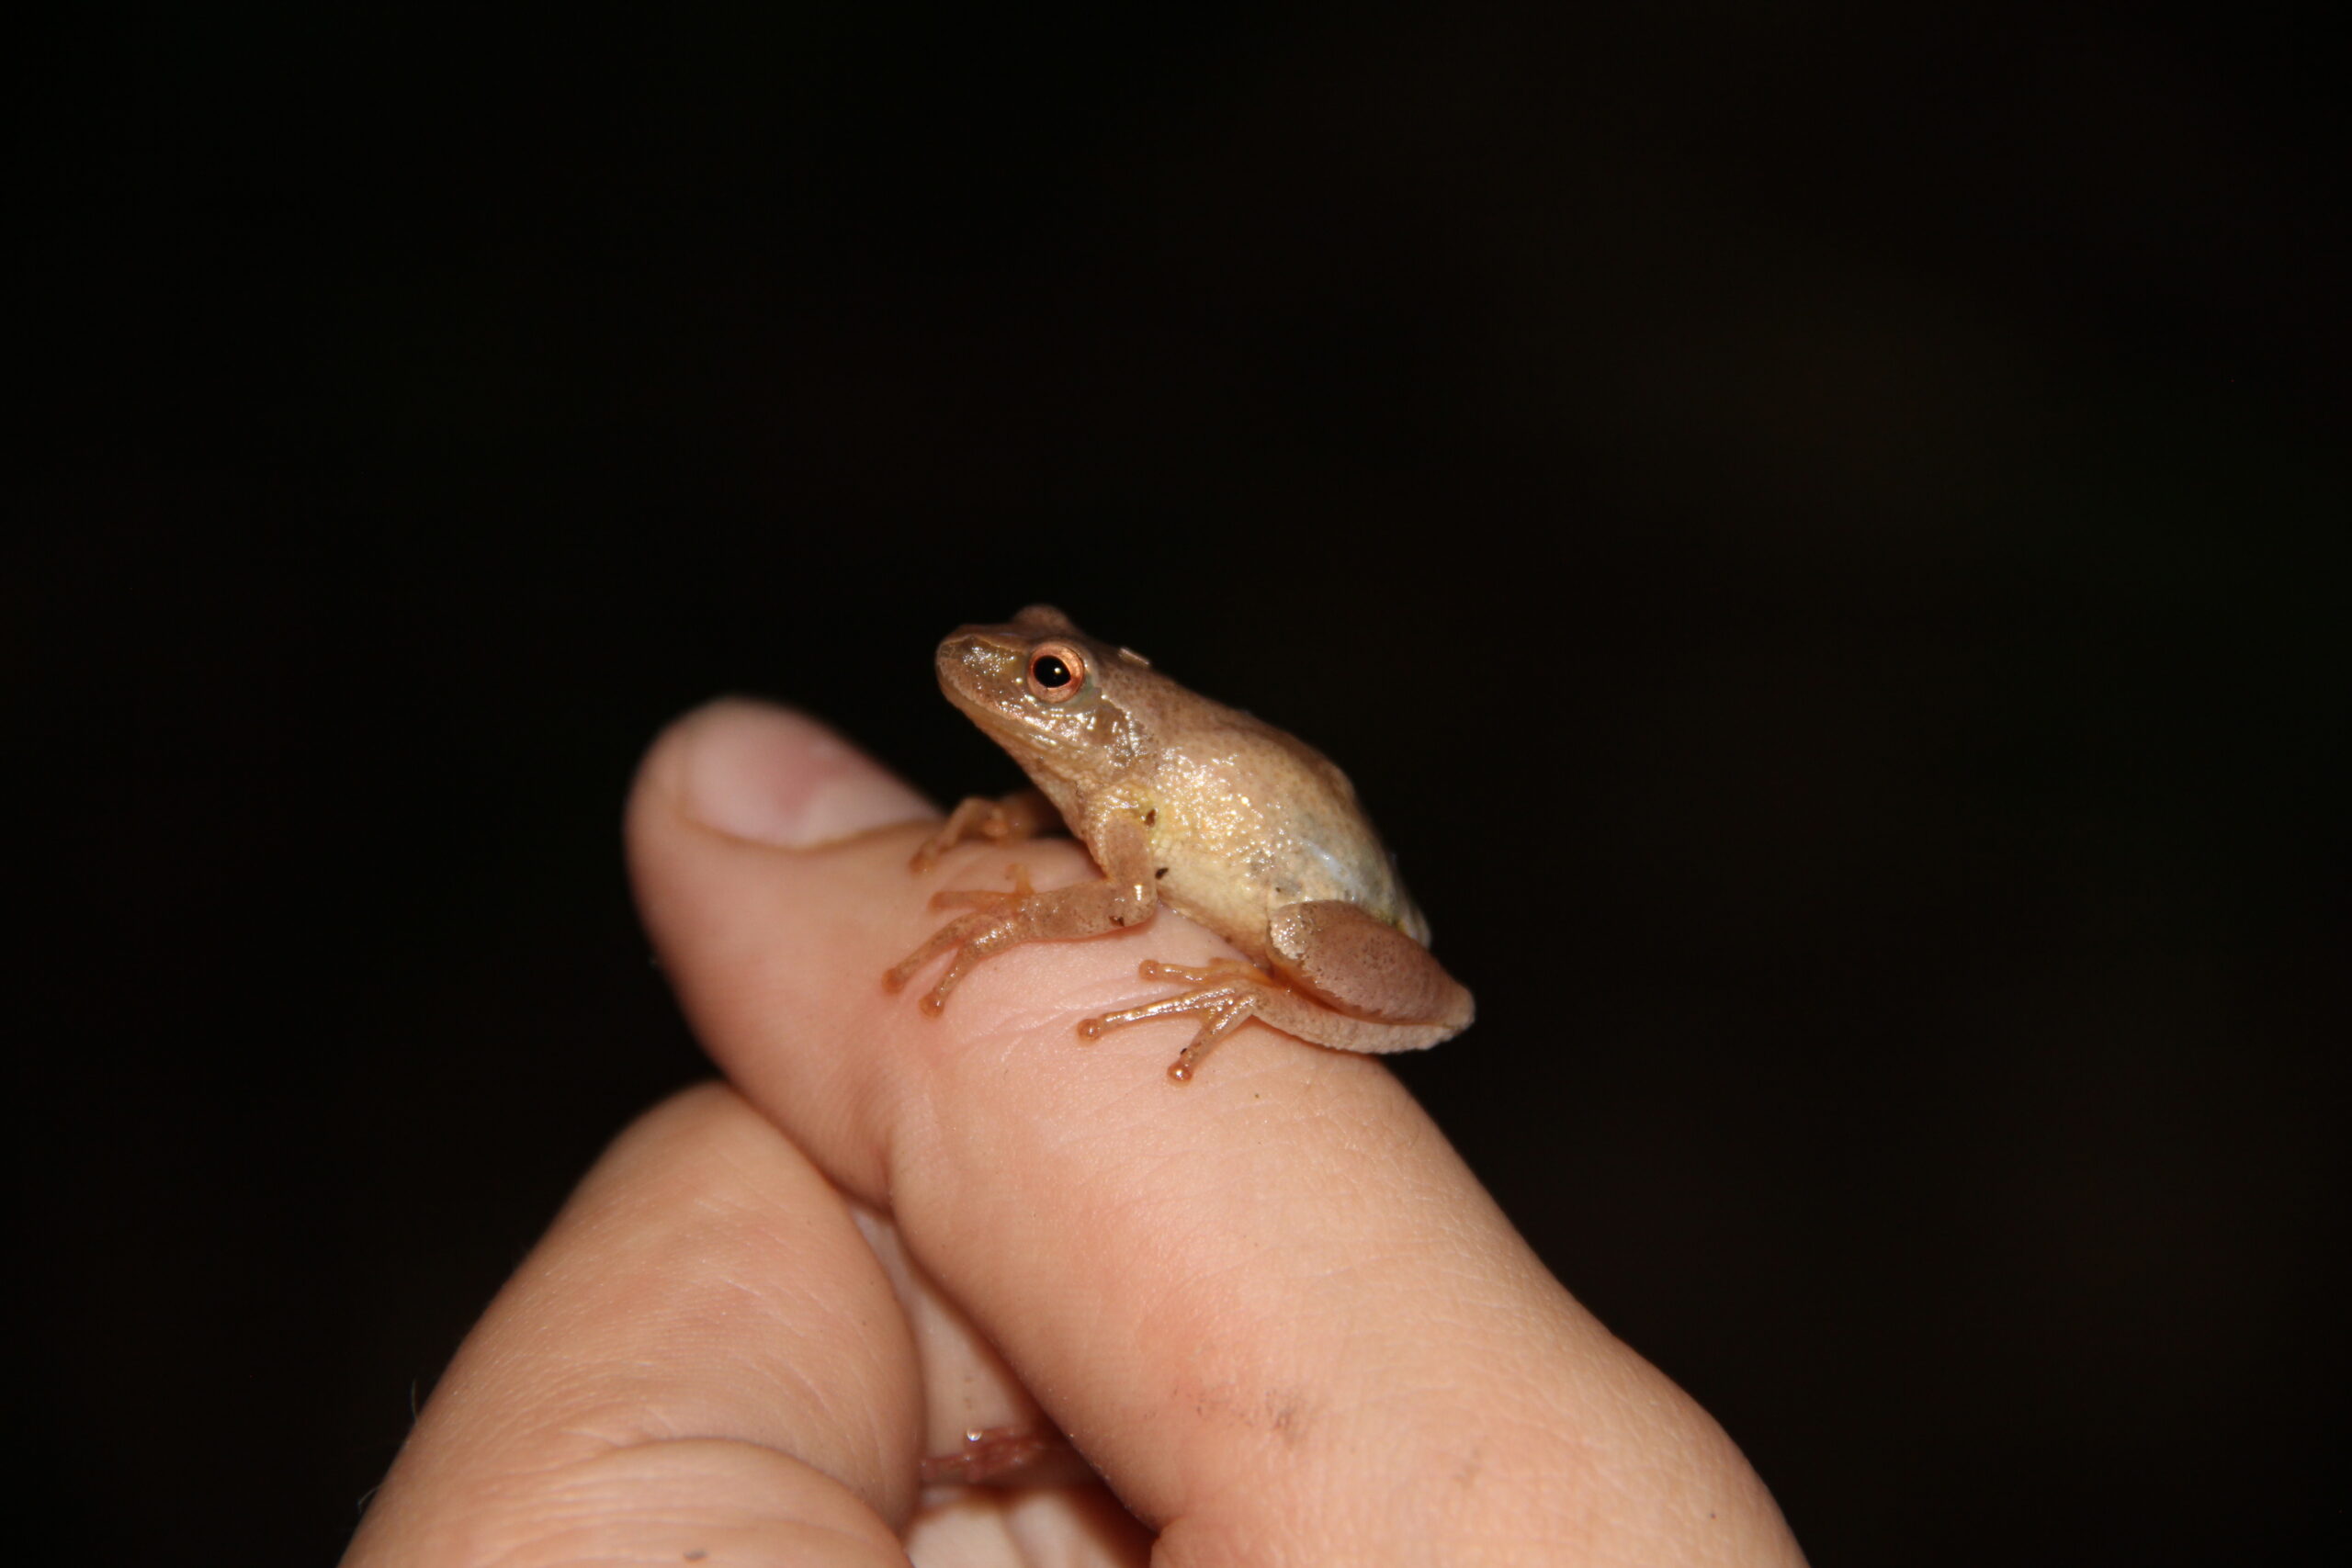 A tiny frog about an inch long, sits on a person’s finger against a black background. Spring peeper.